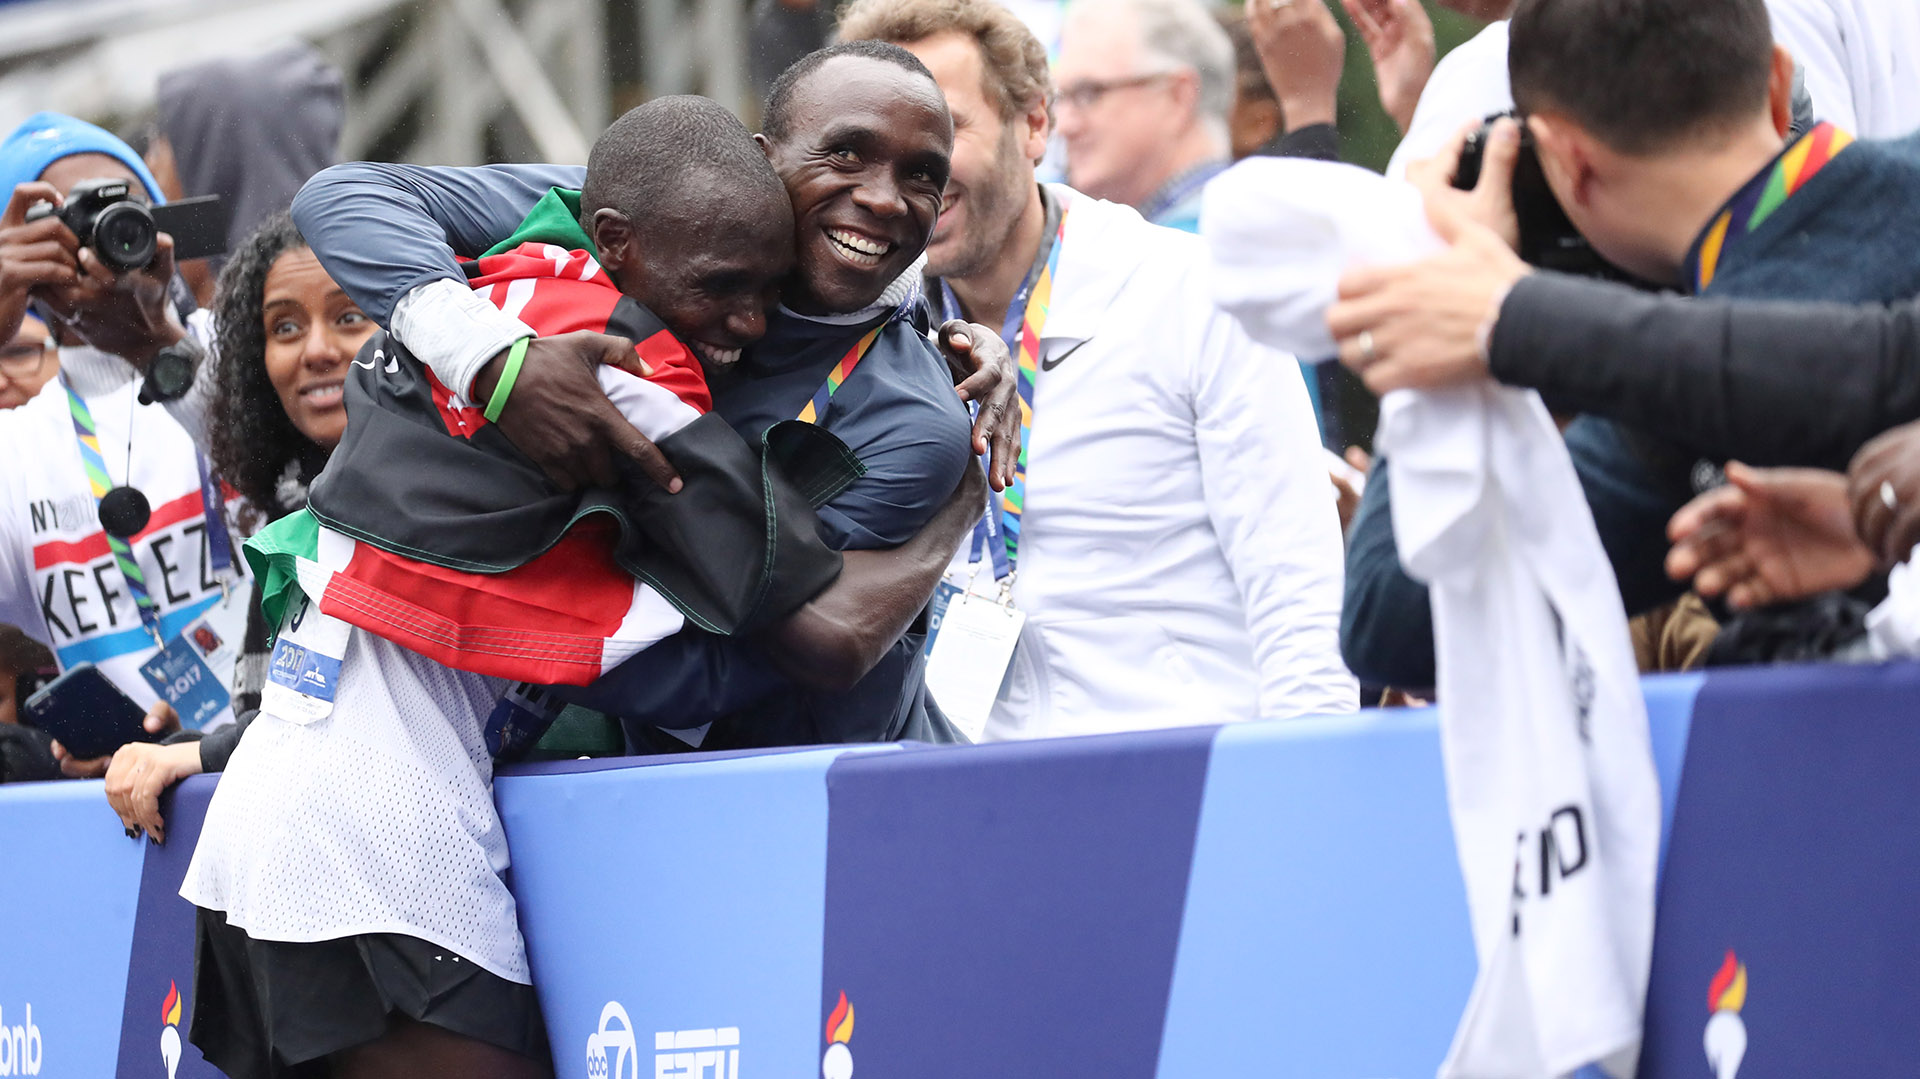 NEW YORK, NY - NOVEMBER 05: Geoffrey Kamworor of Kenya celebrates winning the Professional Men's Division during the 2017 TCS New York City Marathon in Central Park on November 5, 2017 in New York City. (Photo by Elsa/Getty Images)